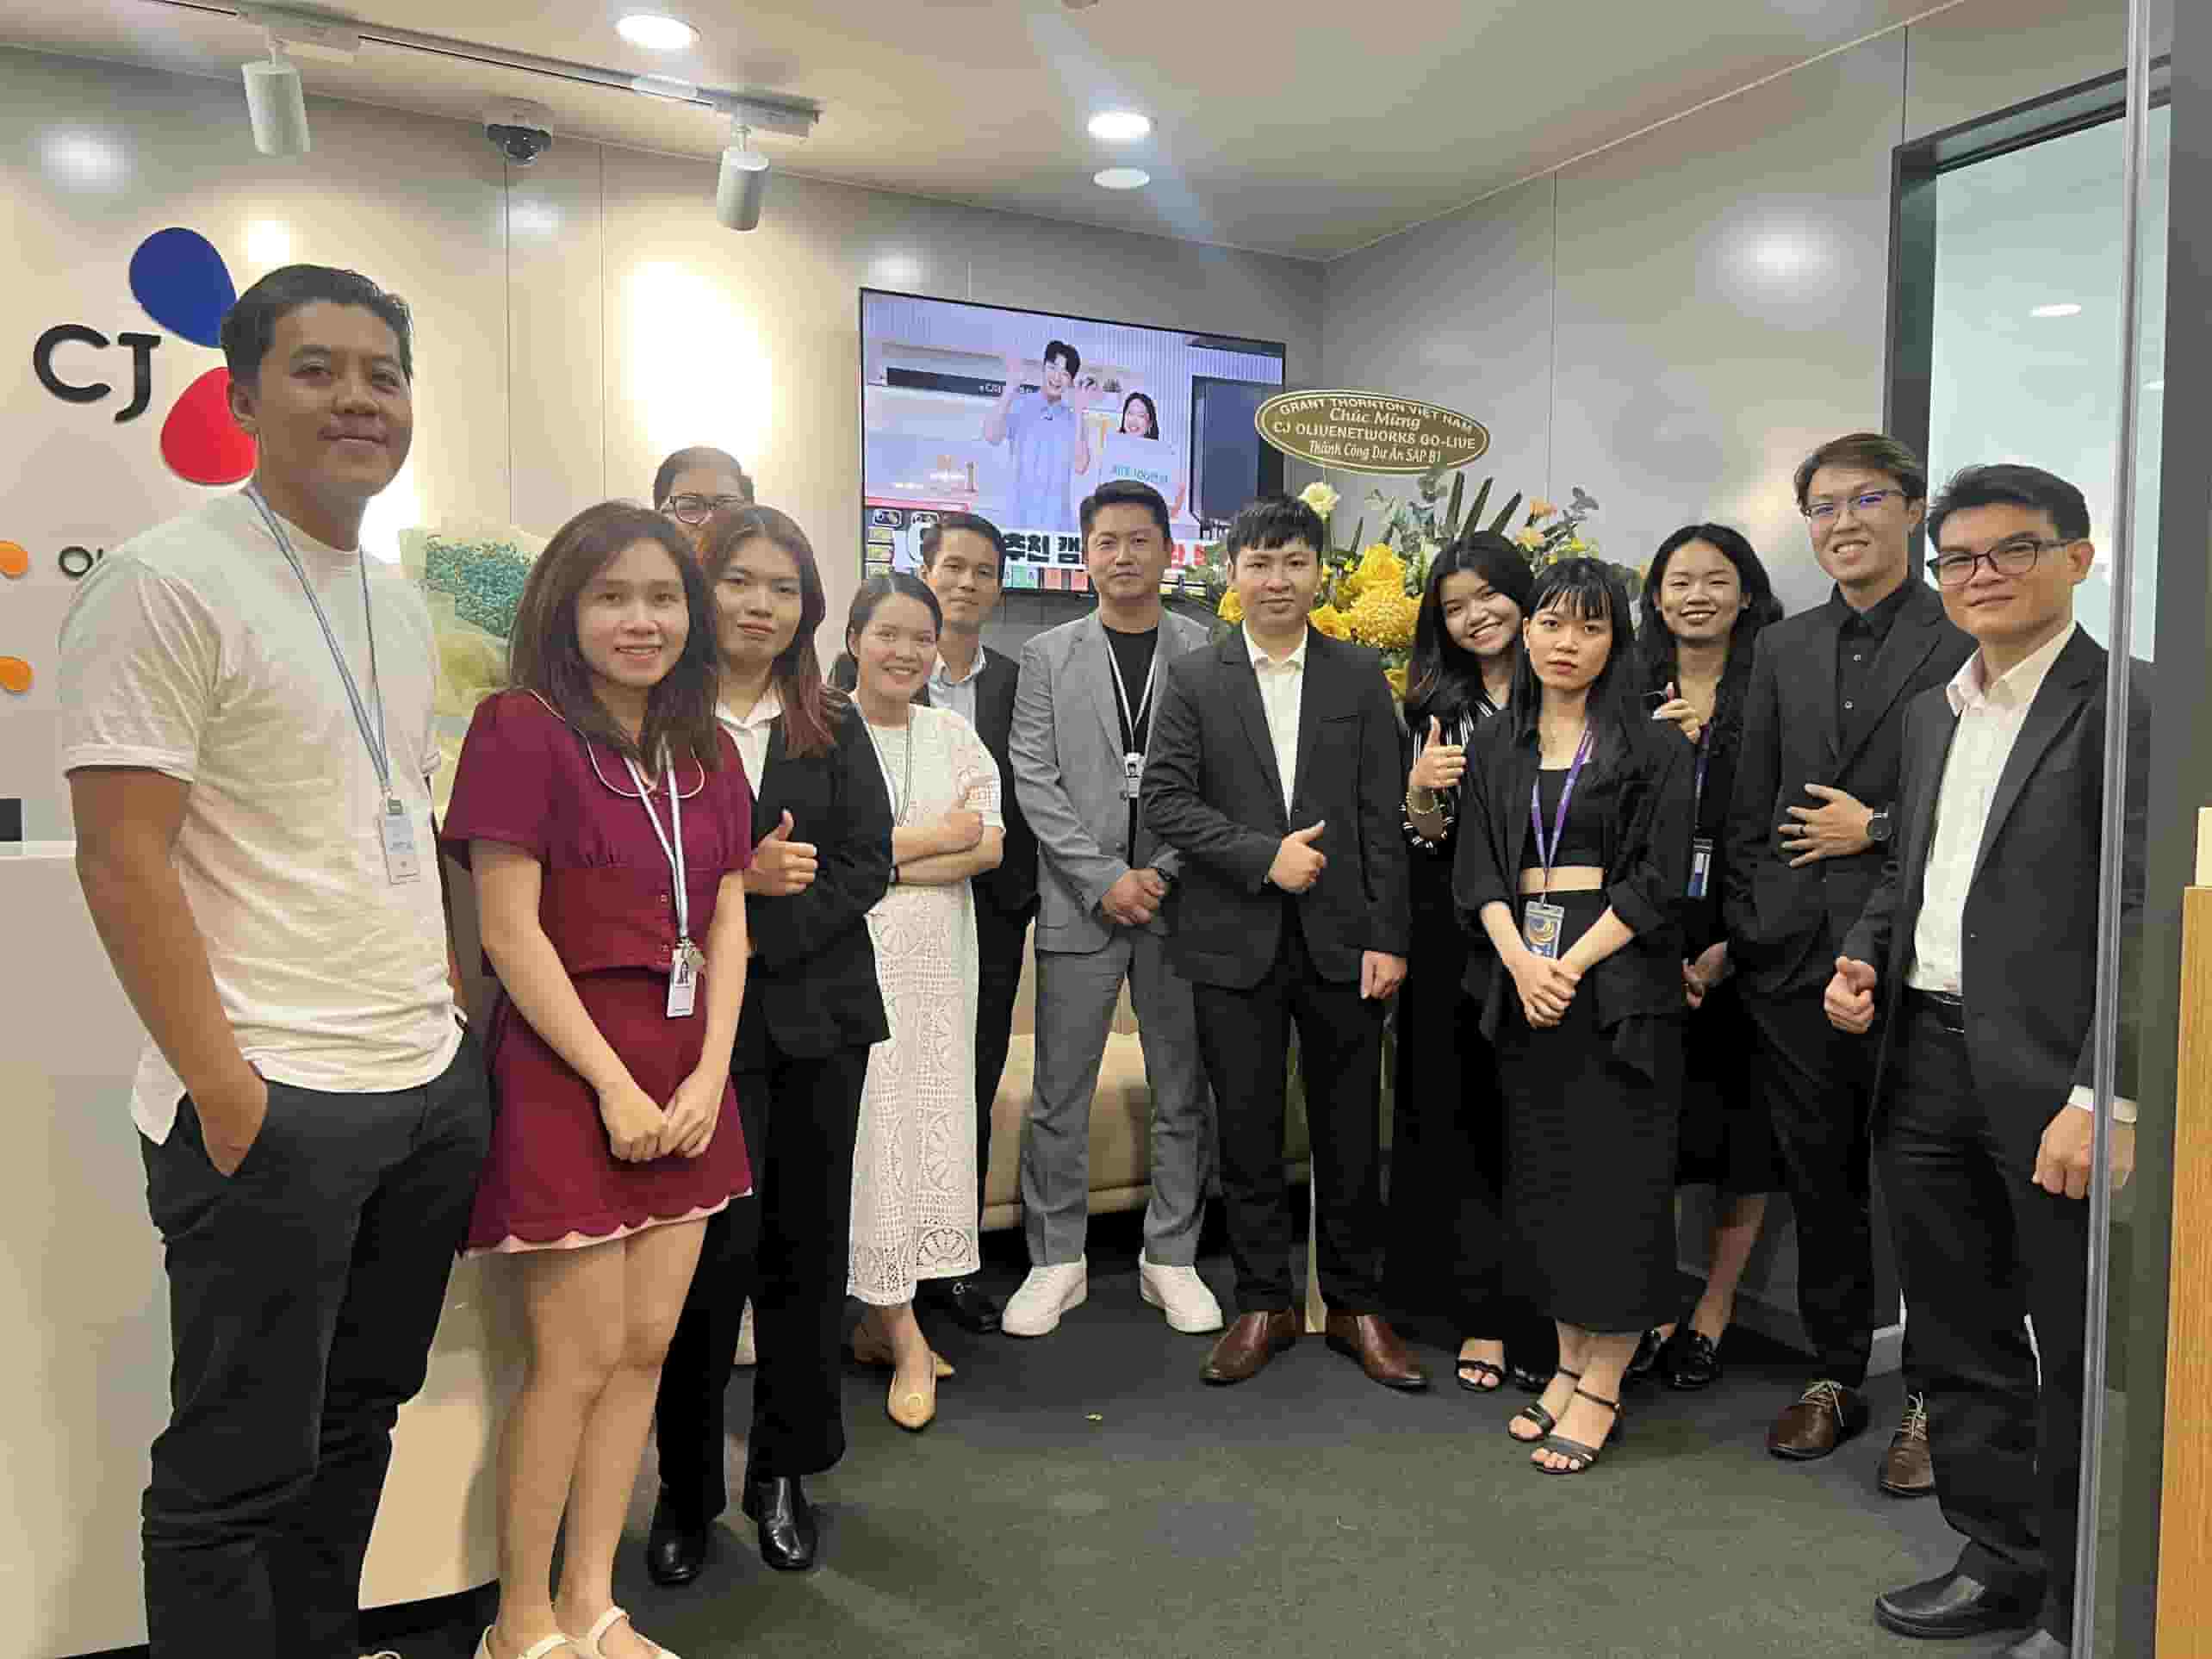 Grant Thornton Vietnam completed the SAP B1 implementation project at CJ Olivenetworks Vina company